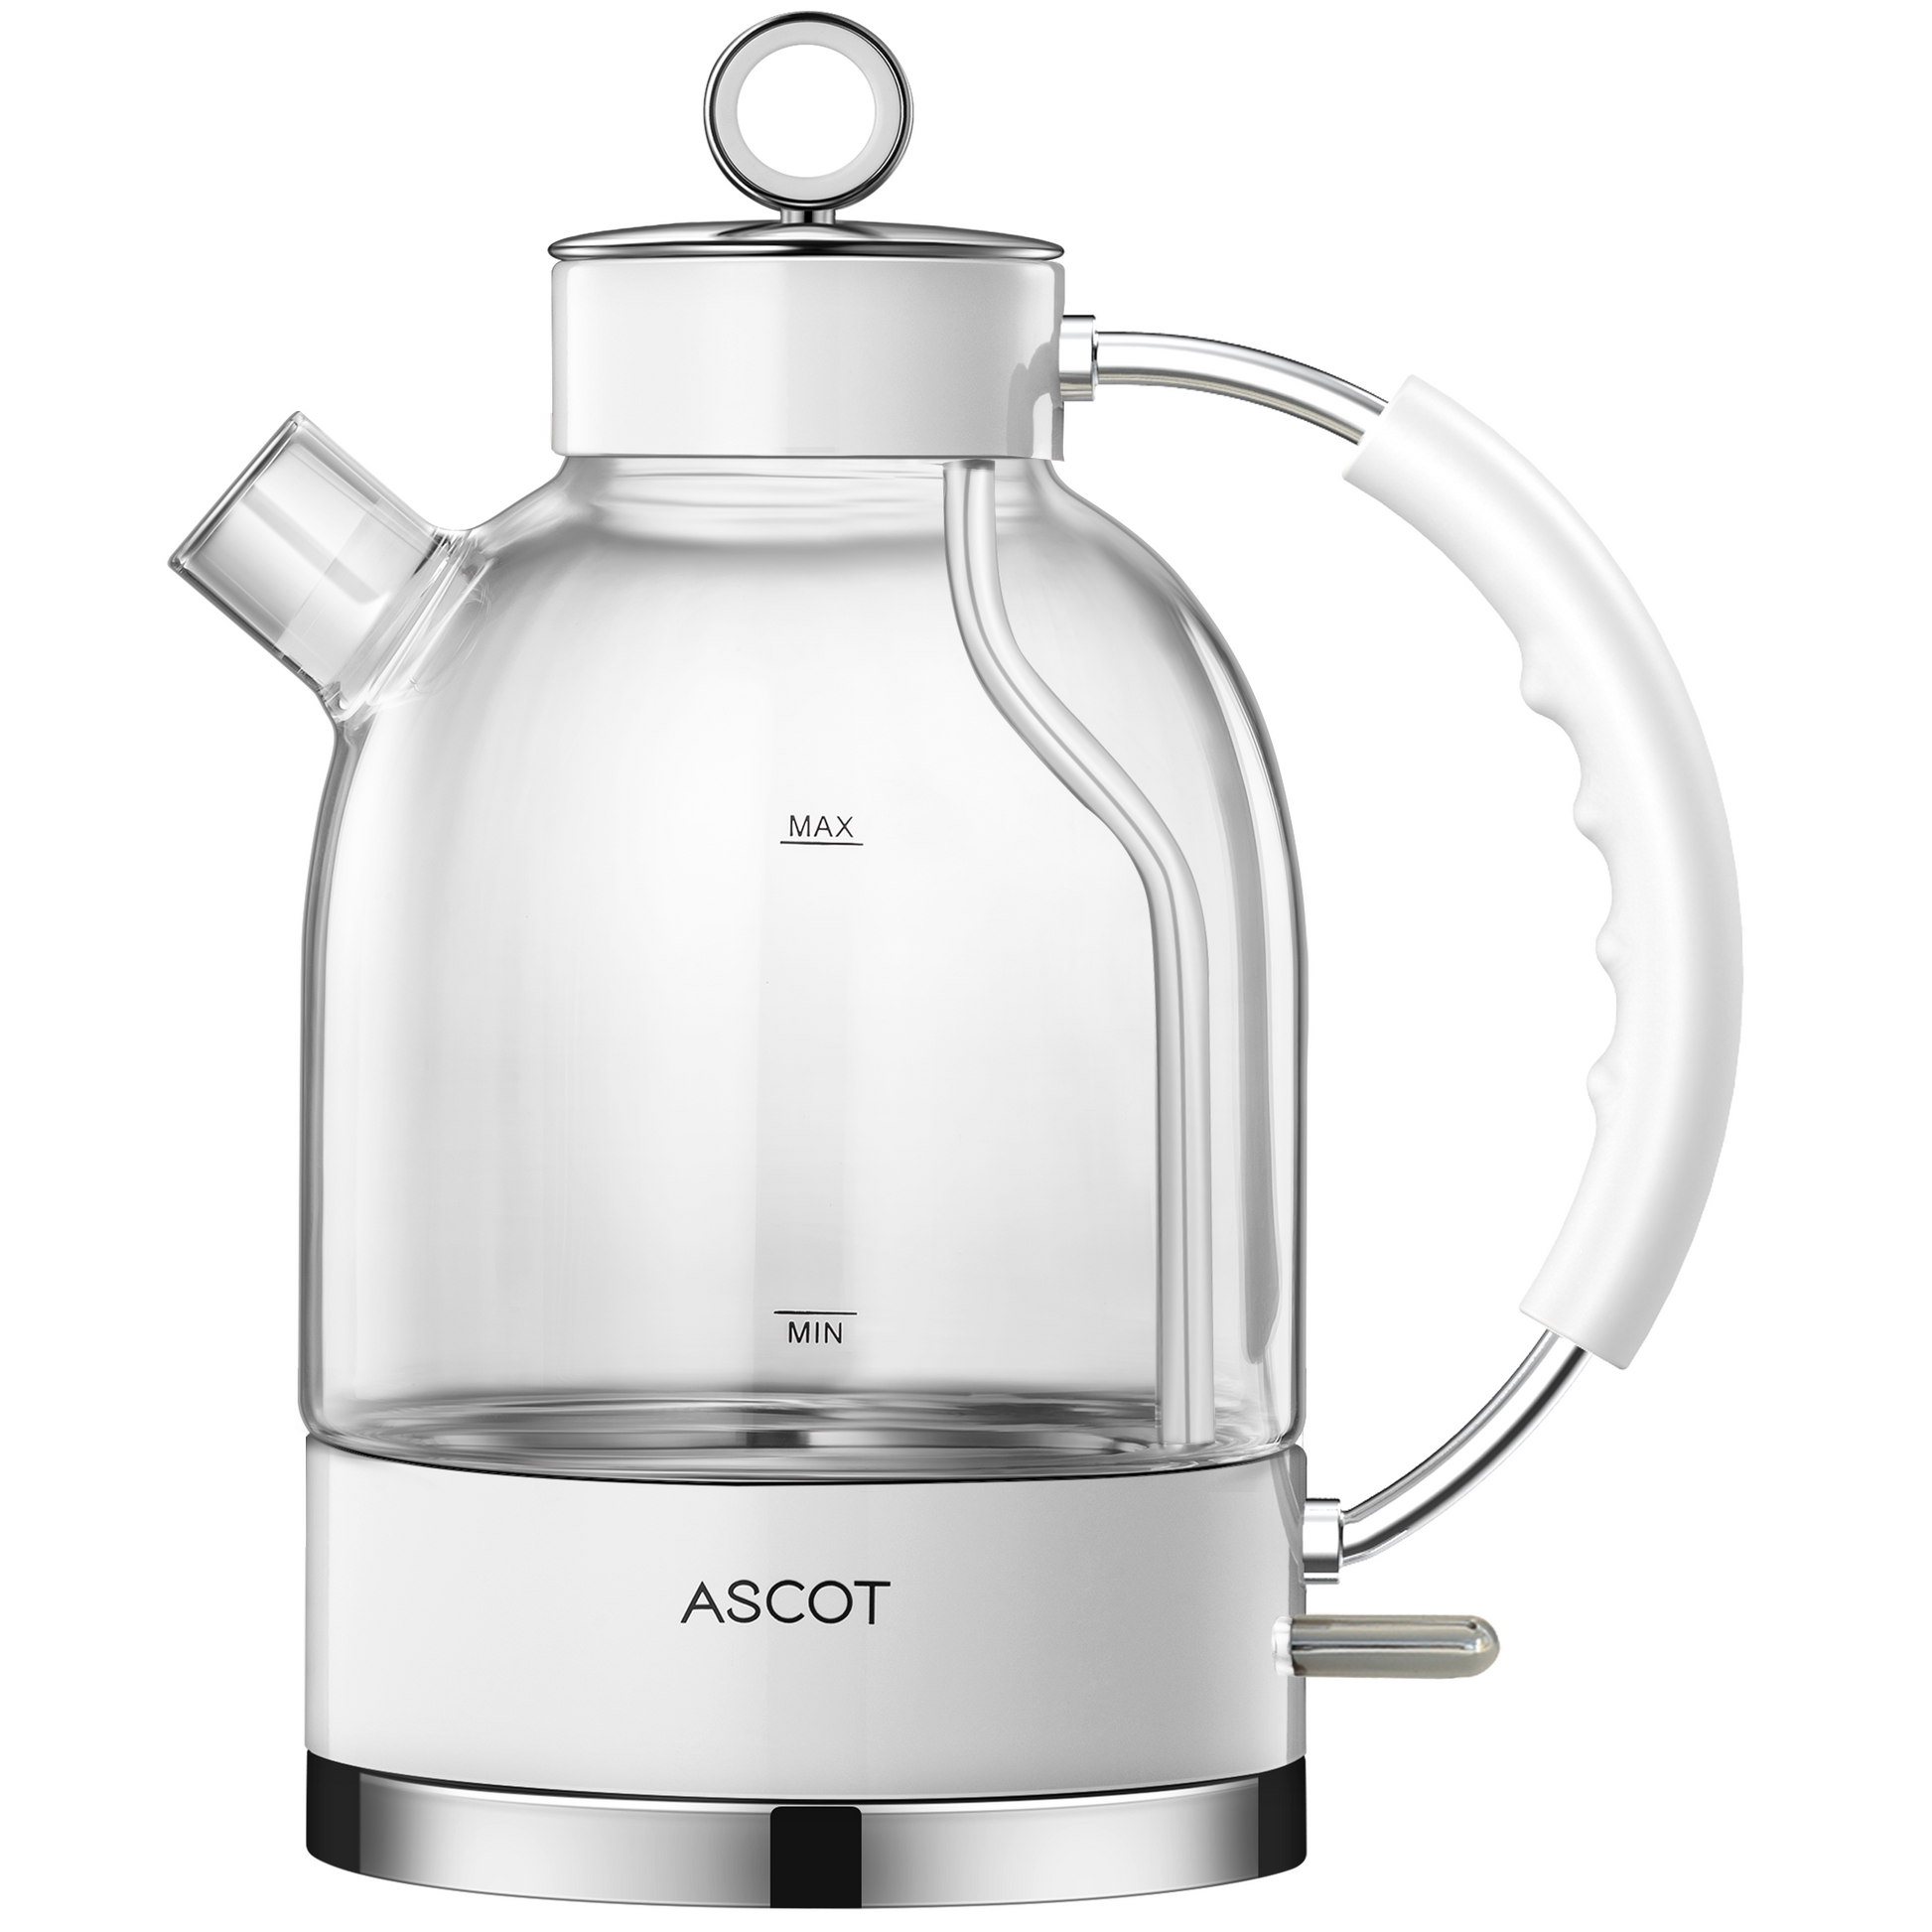 Electric Kettle, ASCOT Stainless Steel Electric Tea Kettle, 1.7QT 1500W 